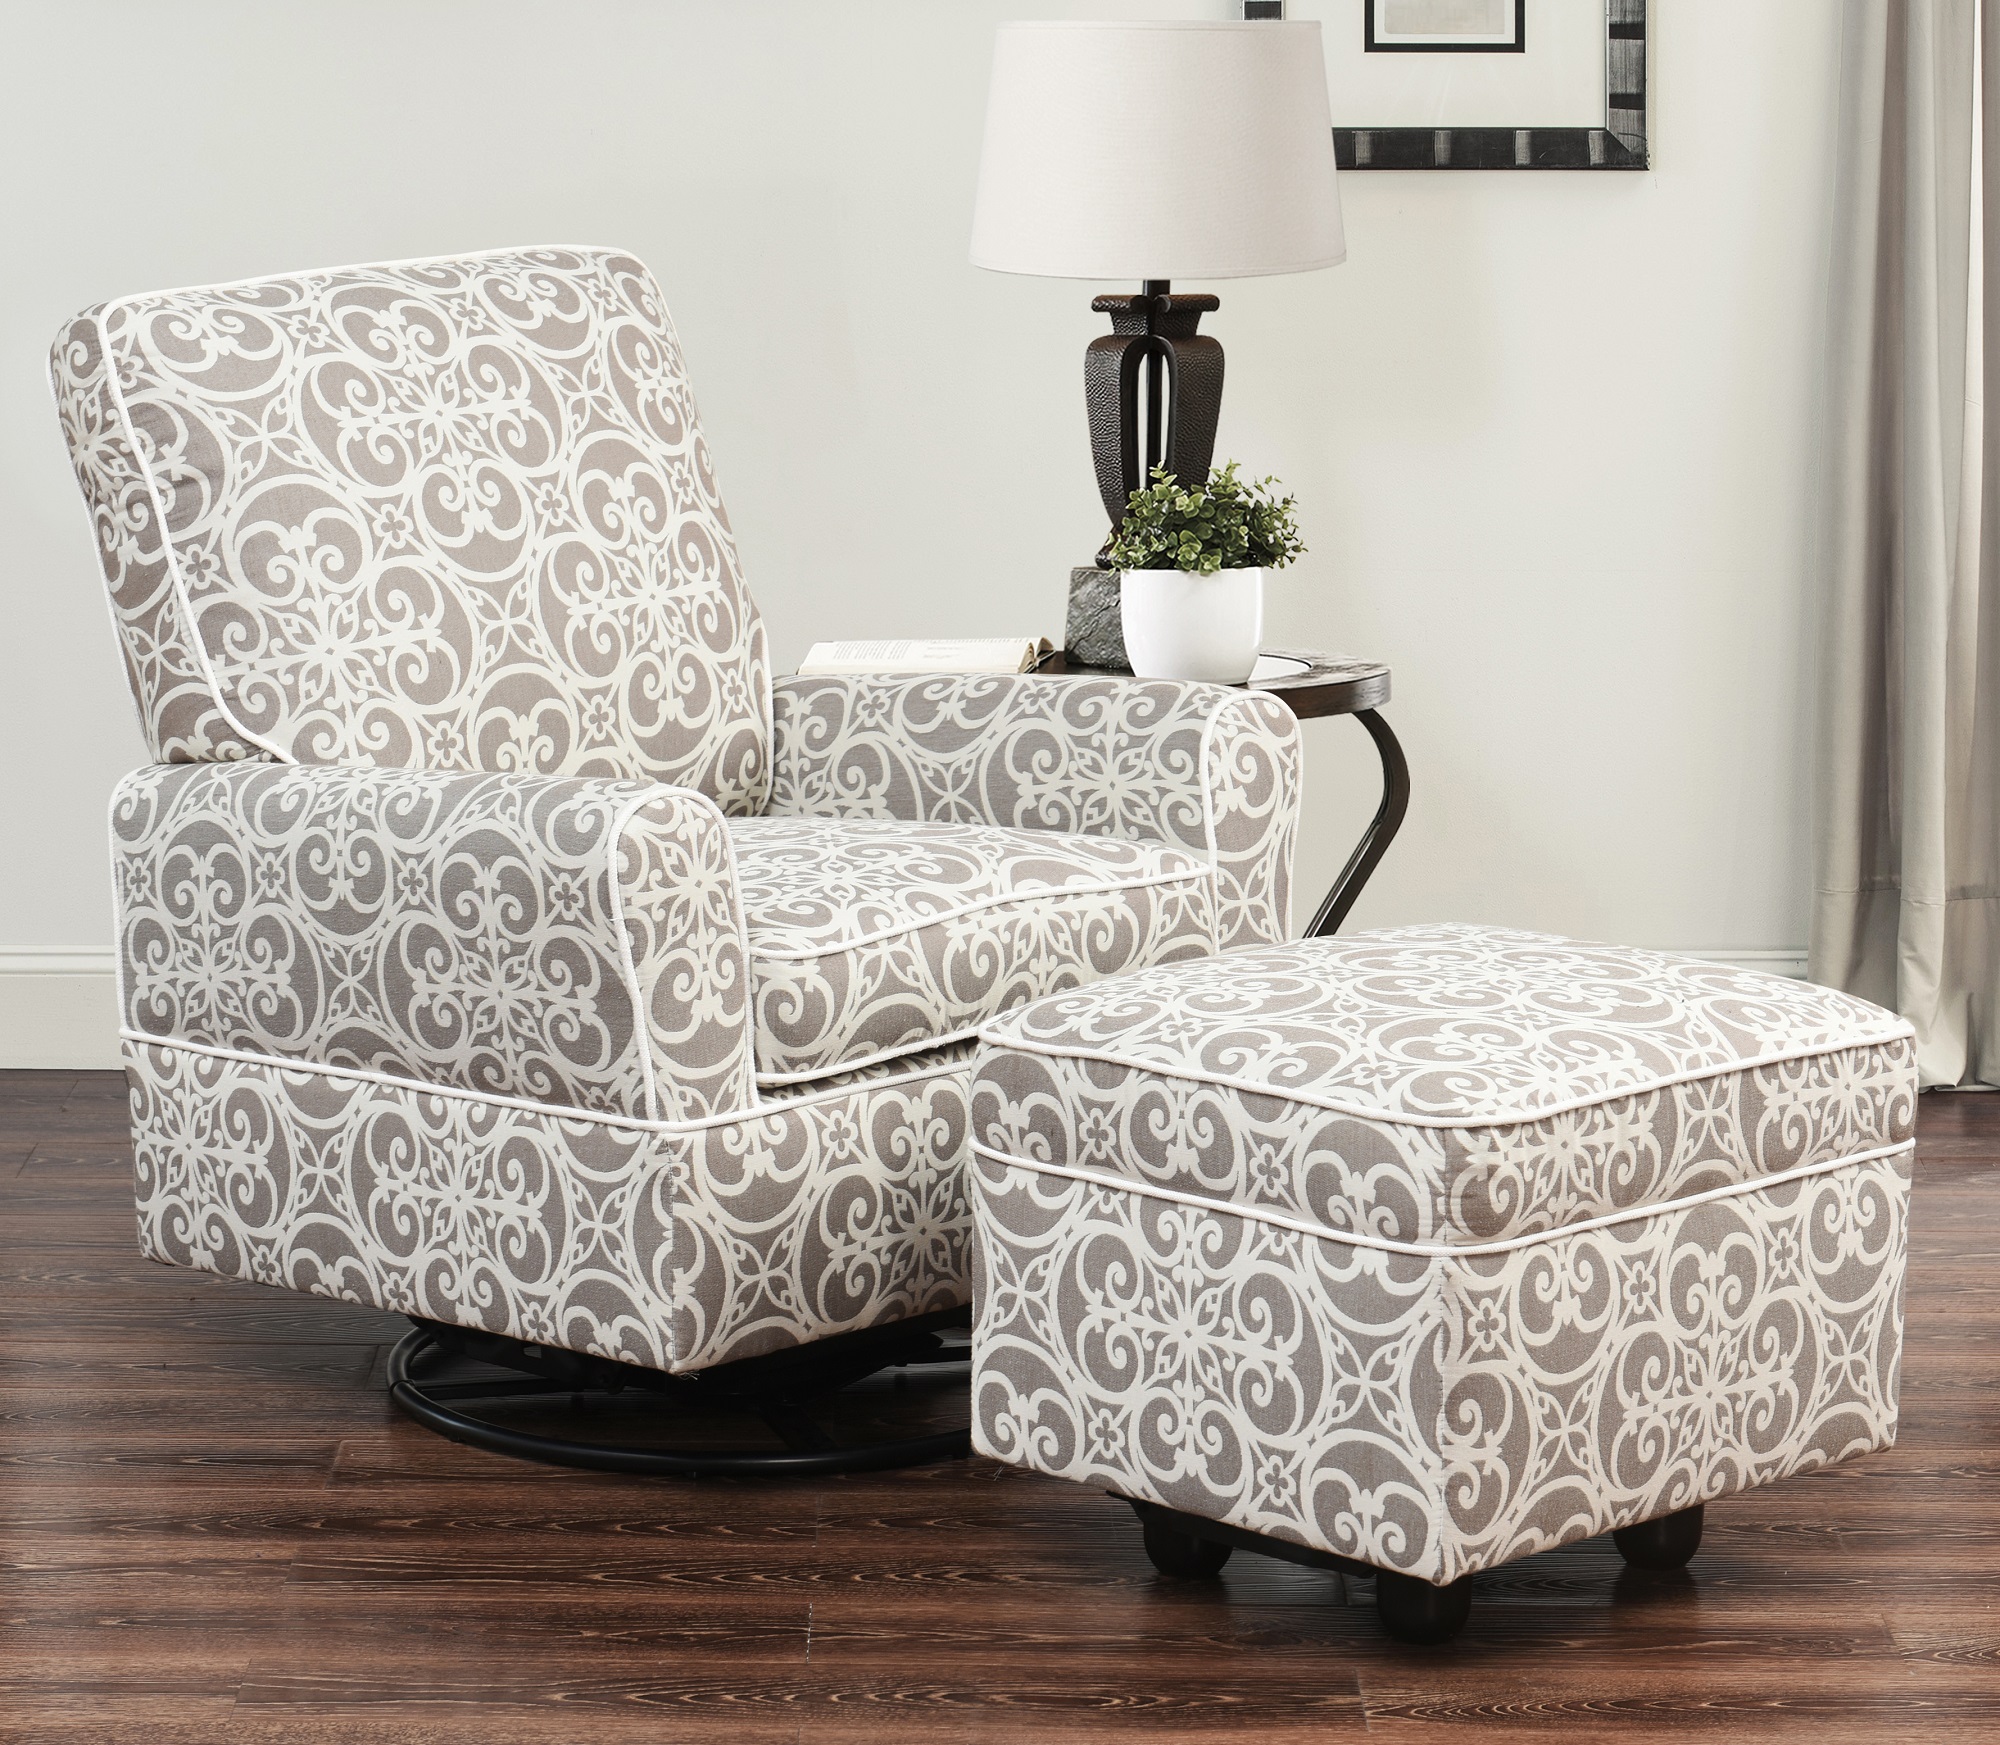 Chase Swivel Glider Chair and Gliding Ottoman - image 2 of 4